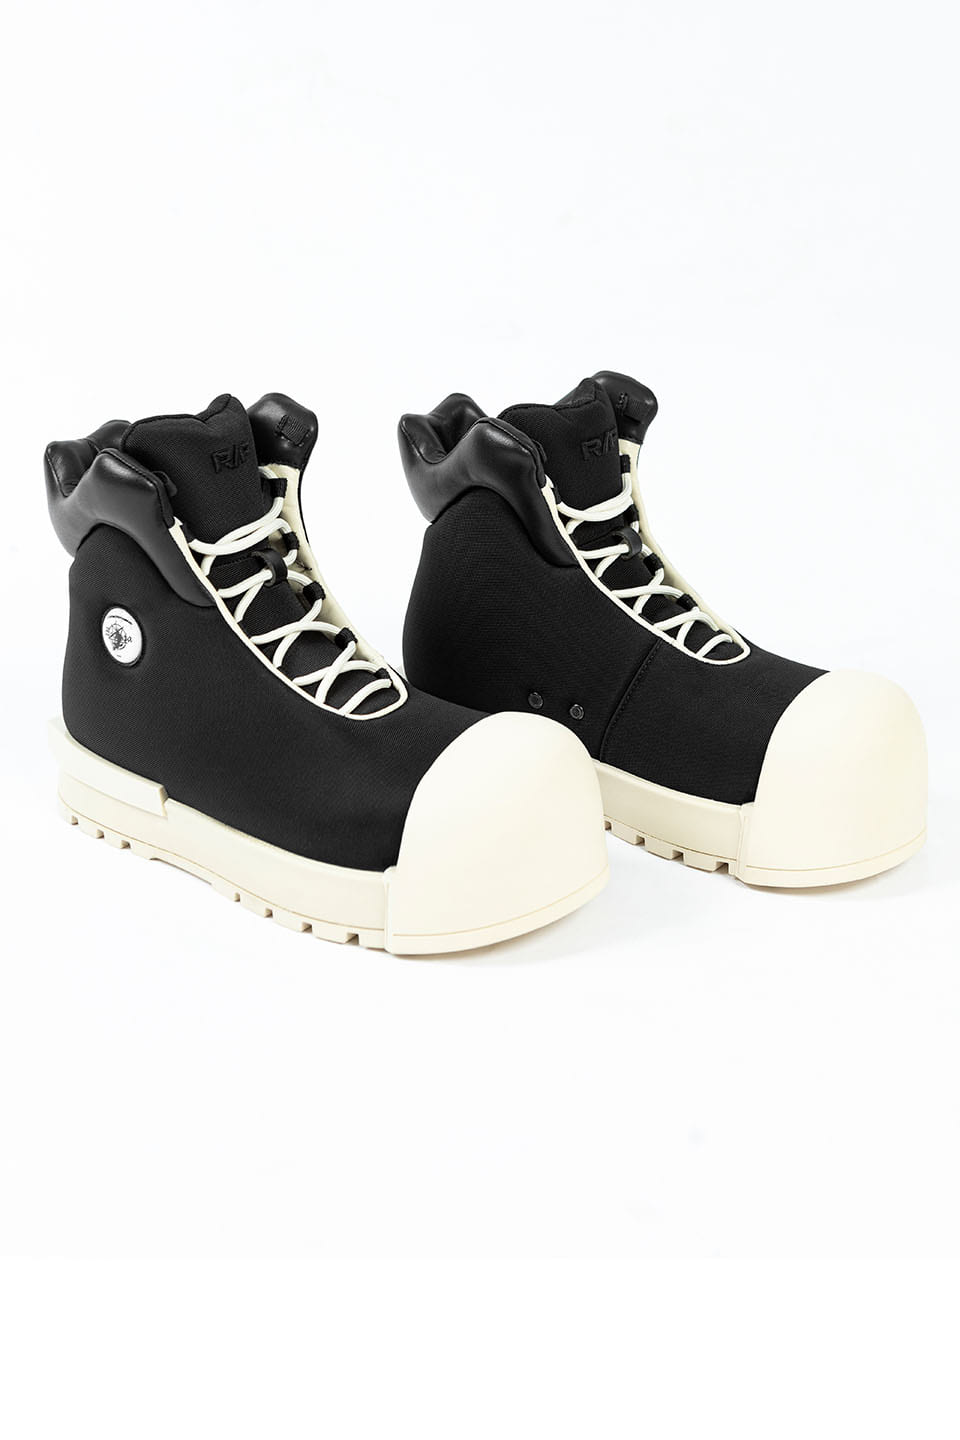 FVVO Thick Soled High Top Boots 即完売品hififnk